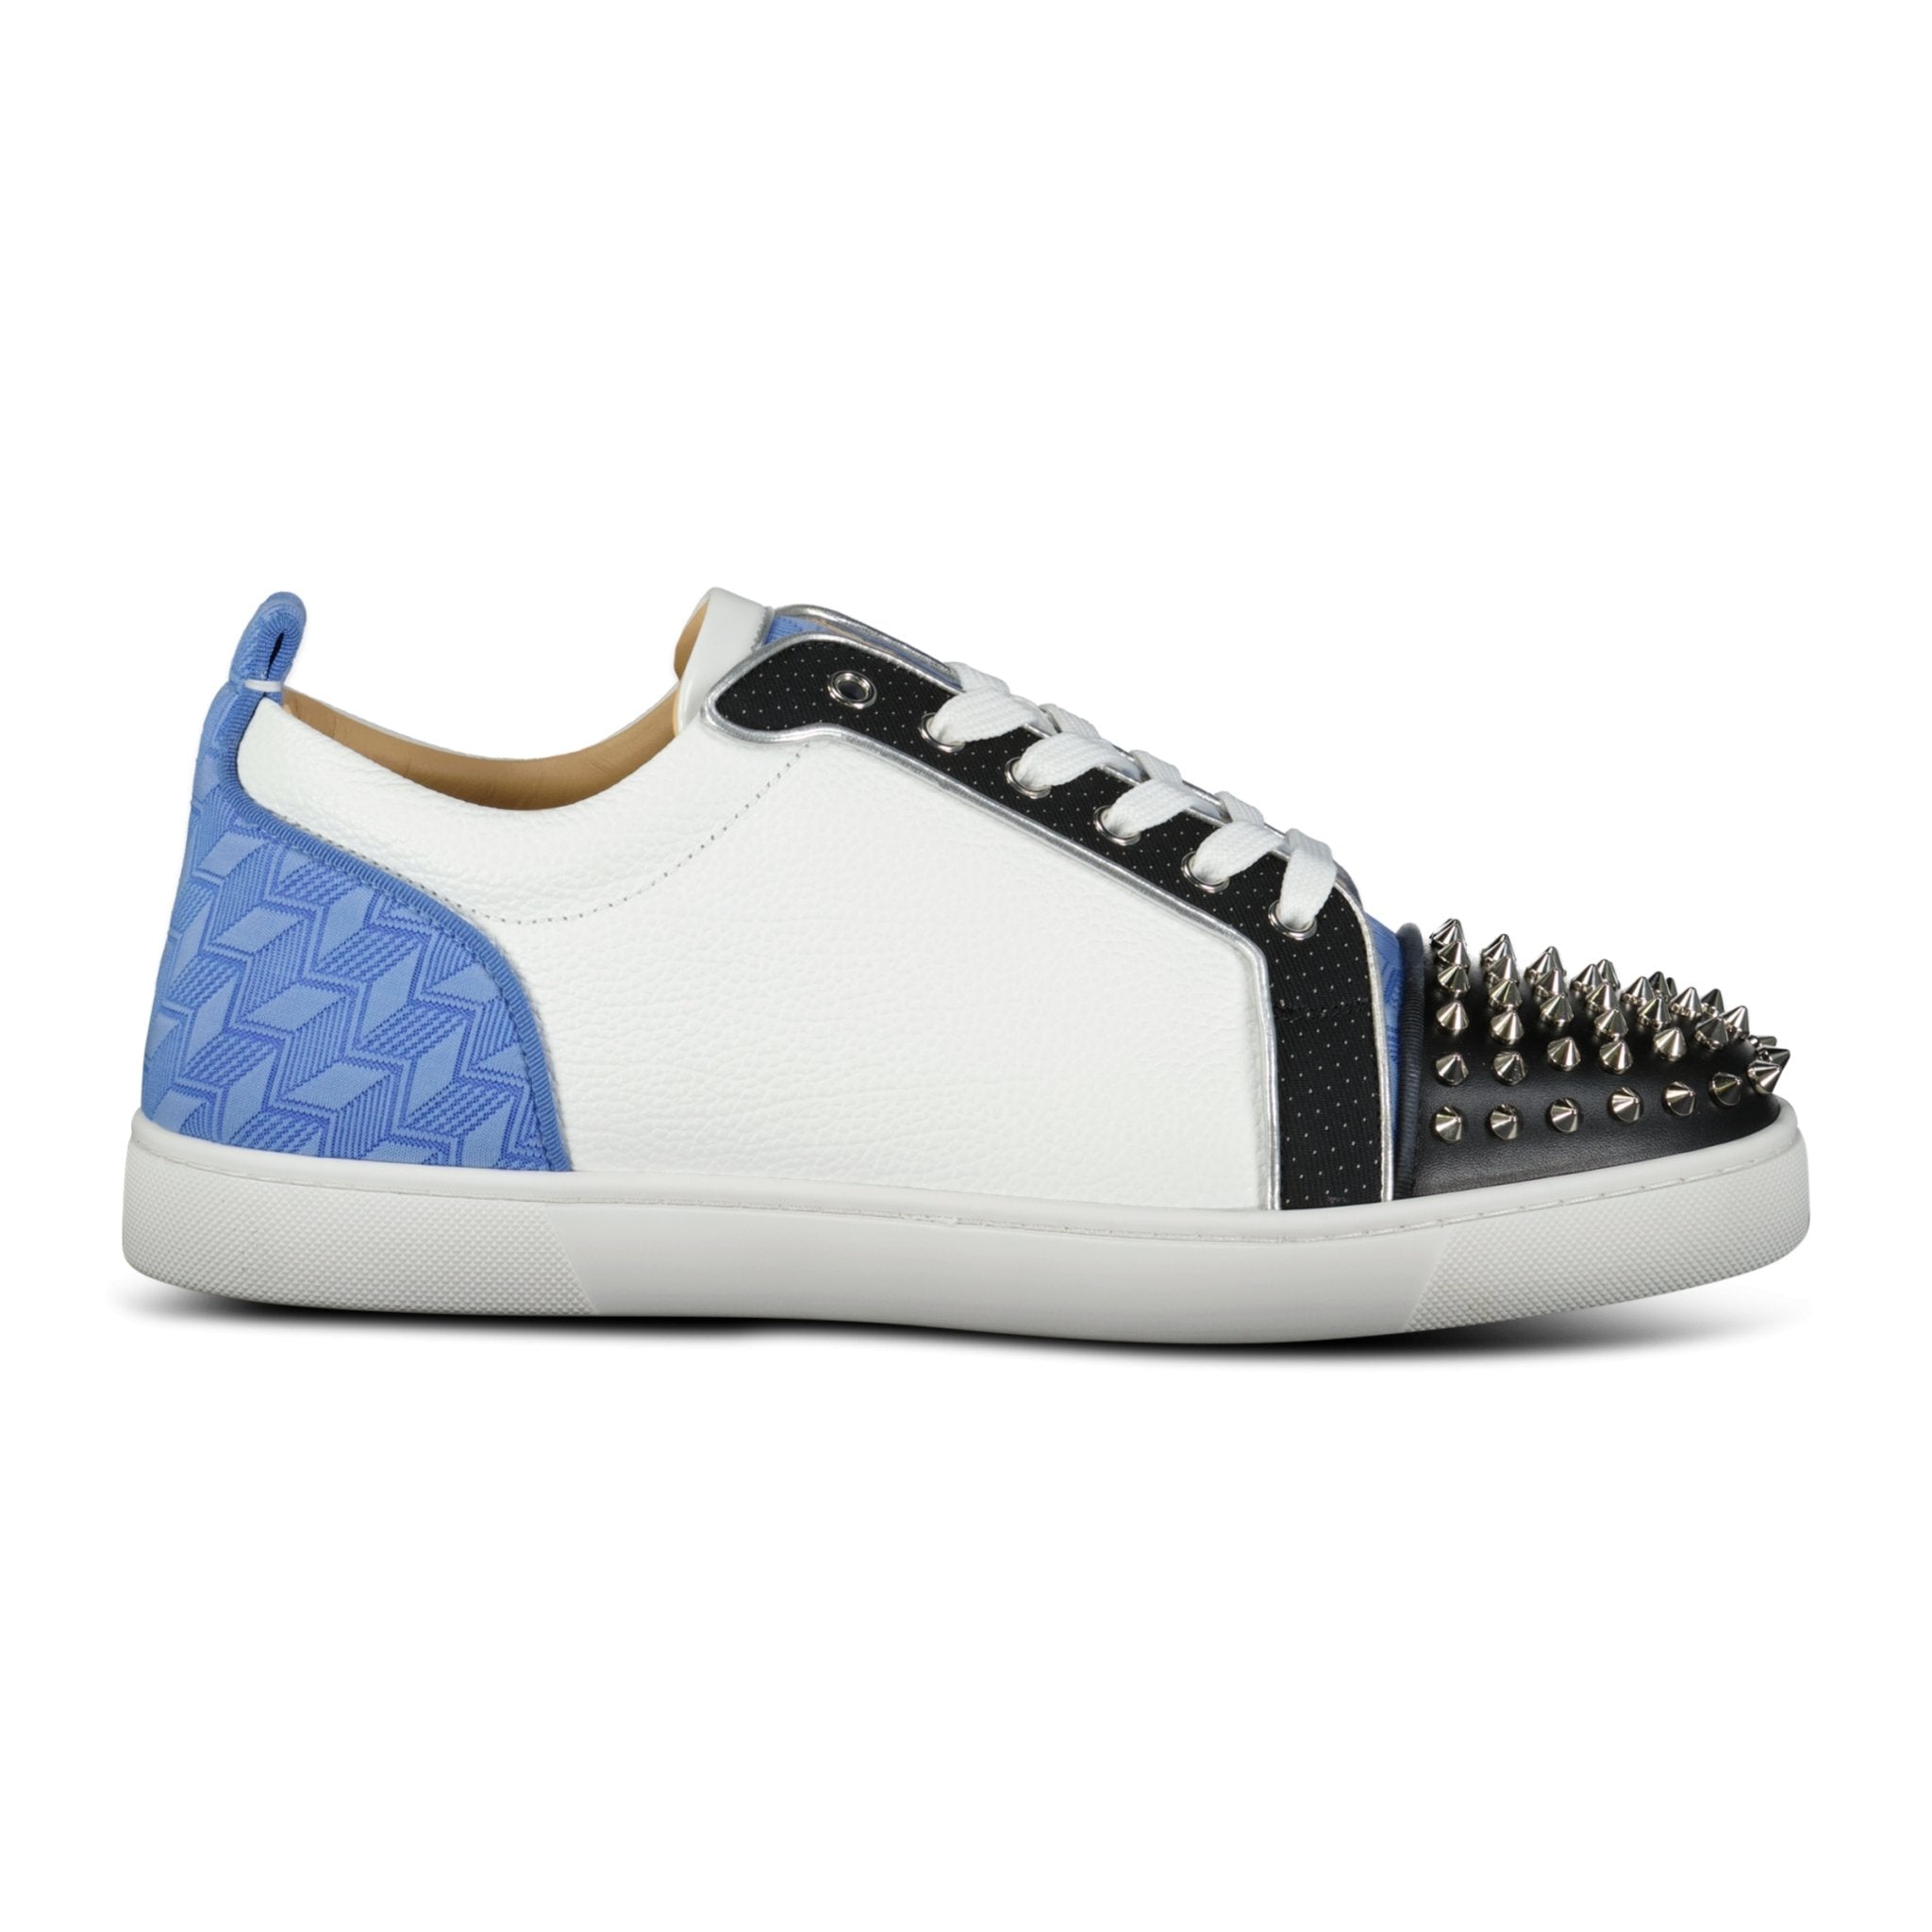 Christian Louboutin Men's Authenticated Trainer